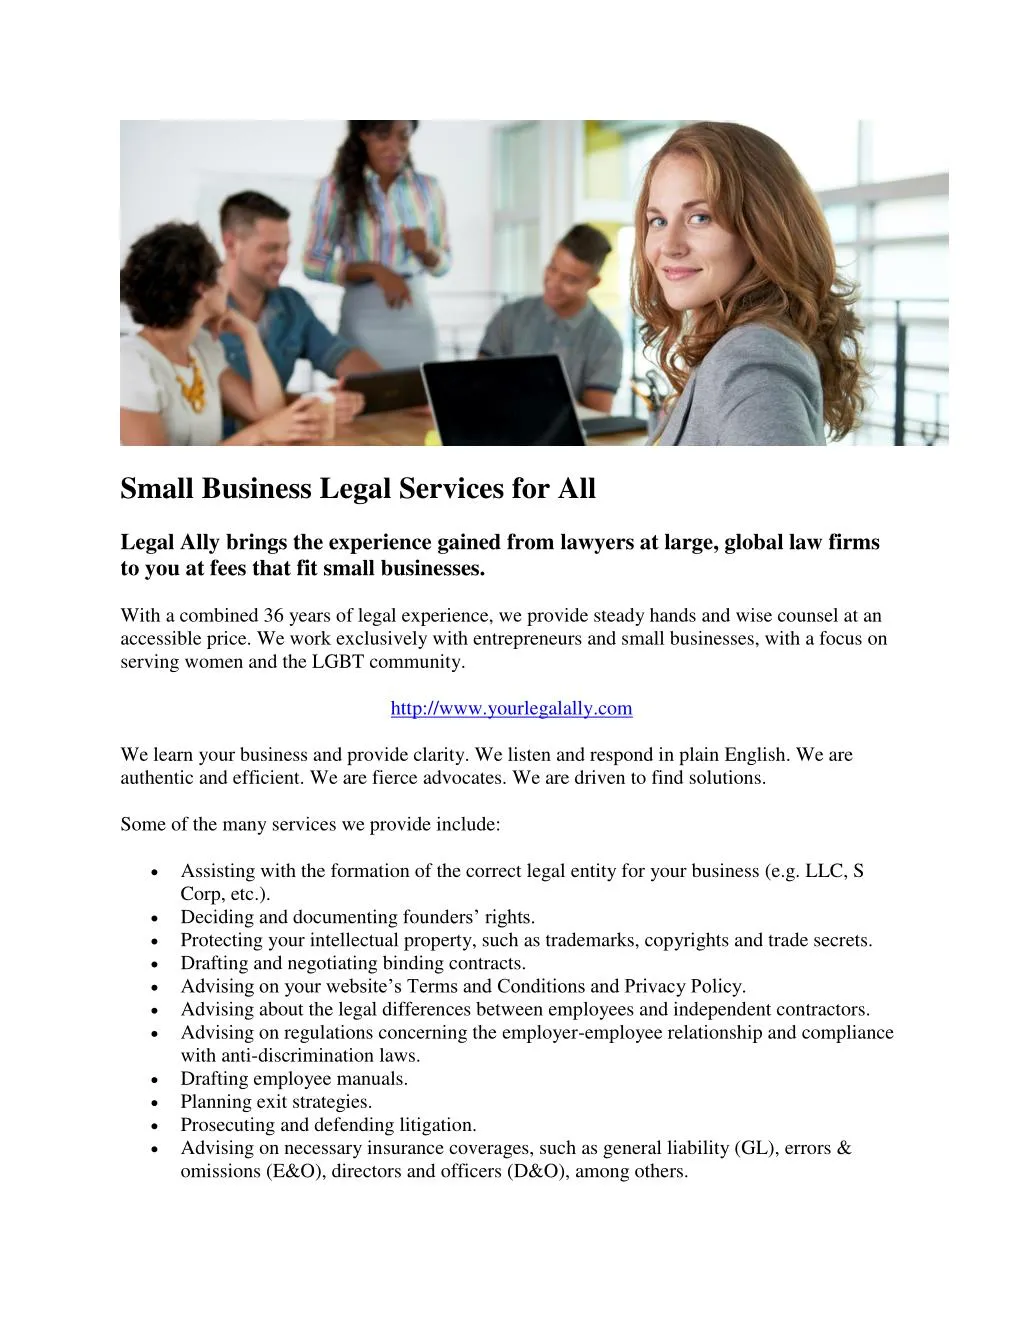 small business legal services for all